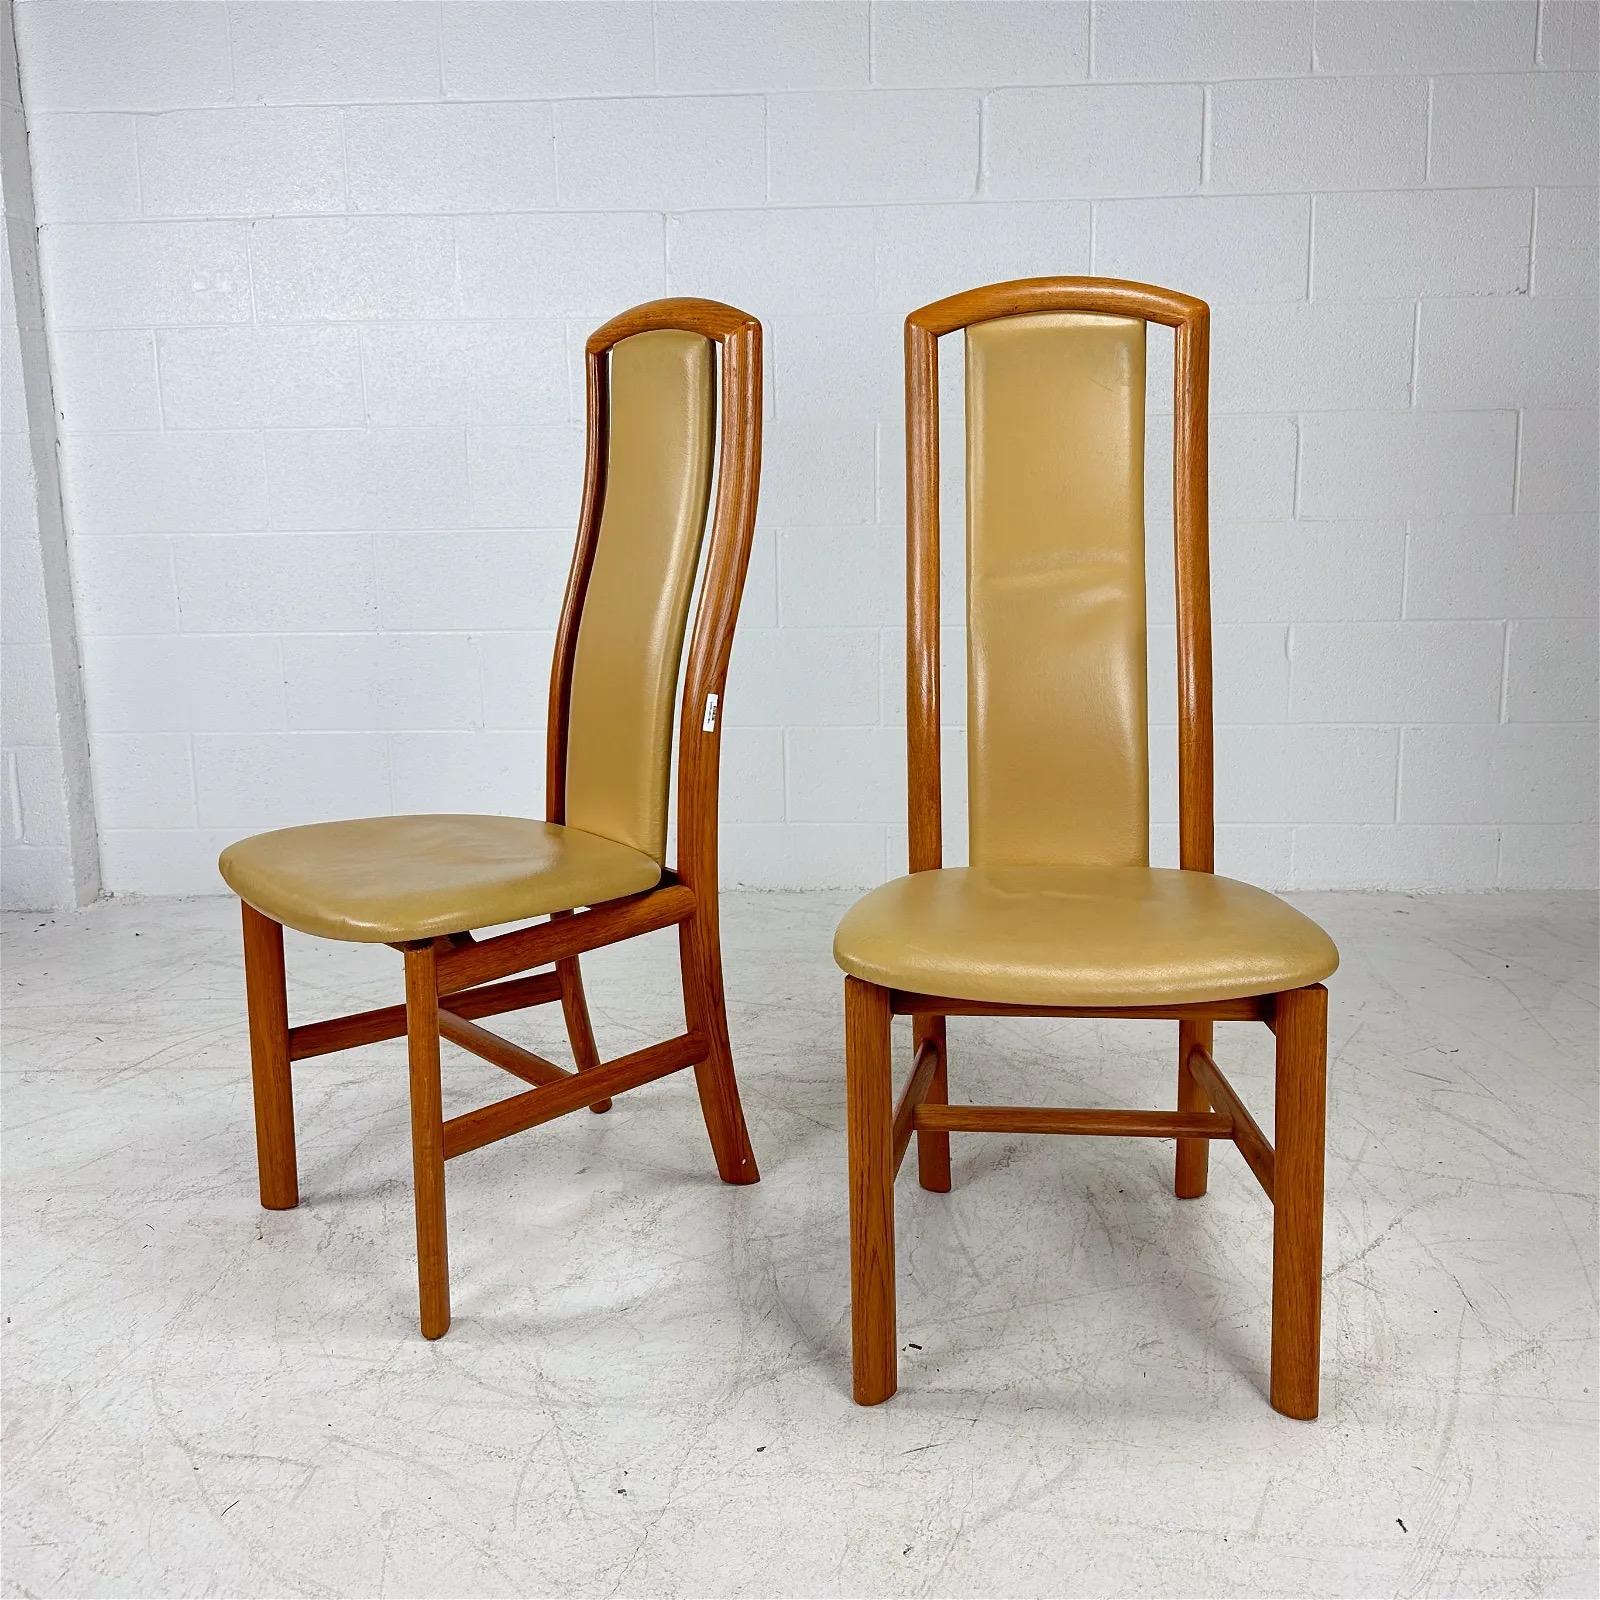 Late 20th Century Skovby Danish Modern Teak High Back Dining Chairs - Set of 10 For Sale